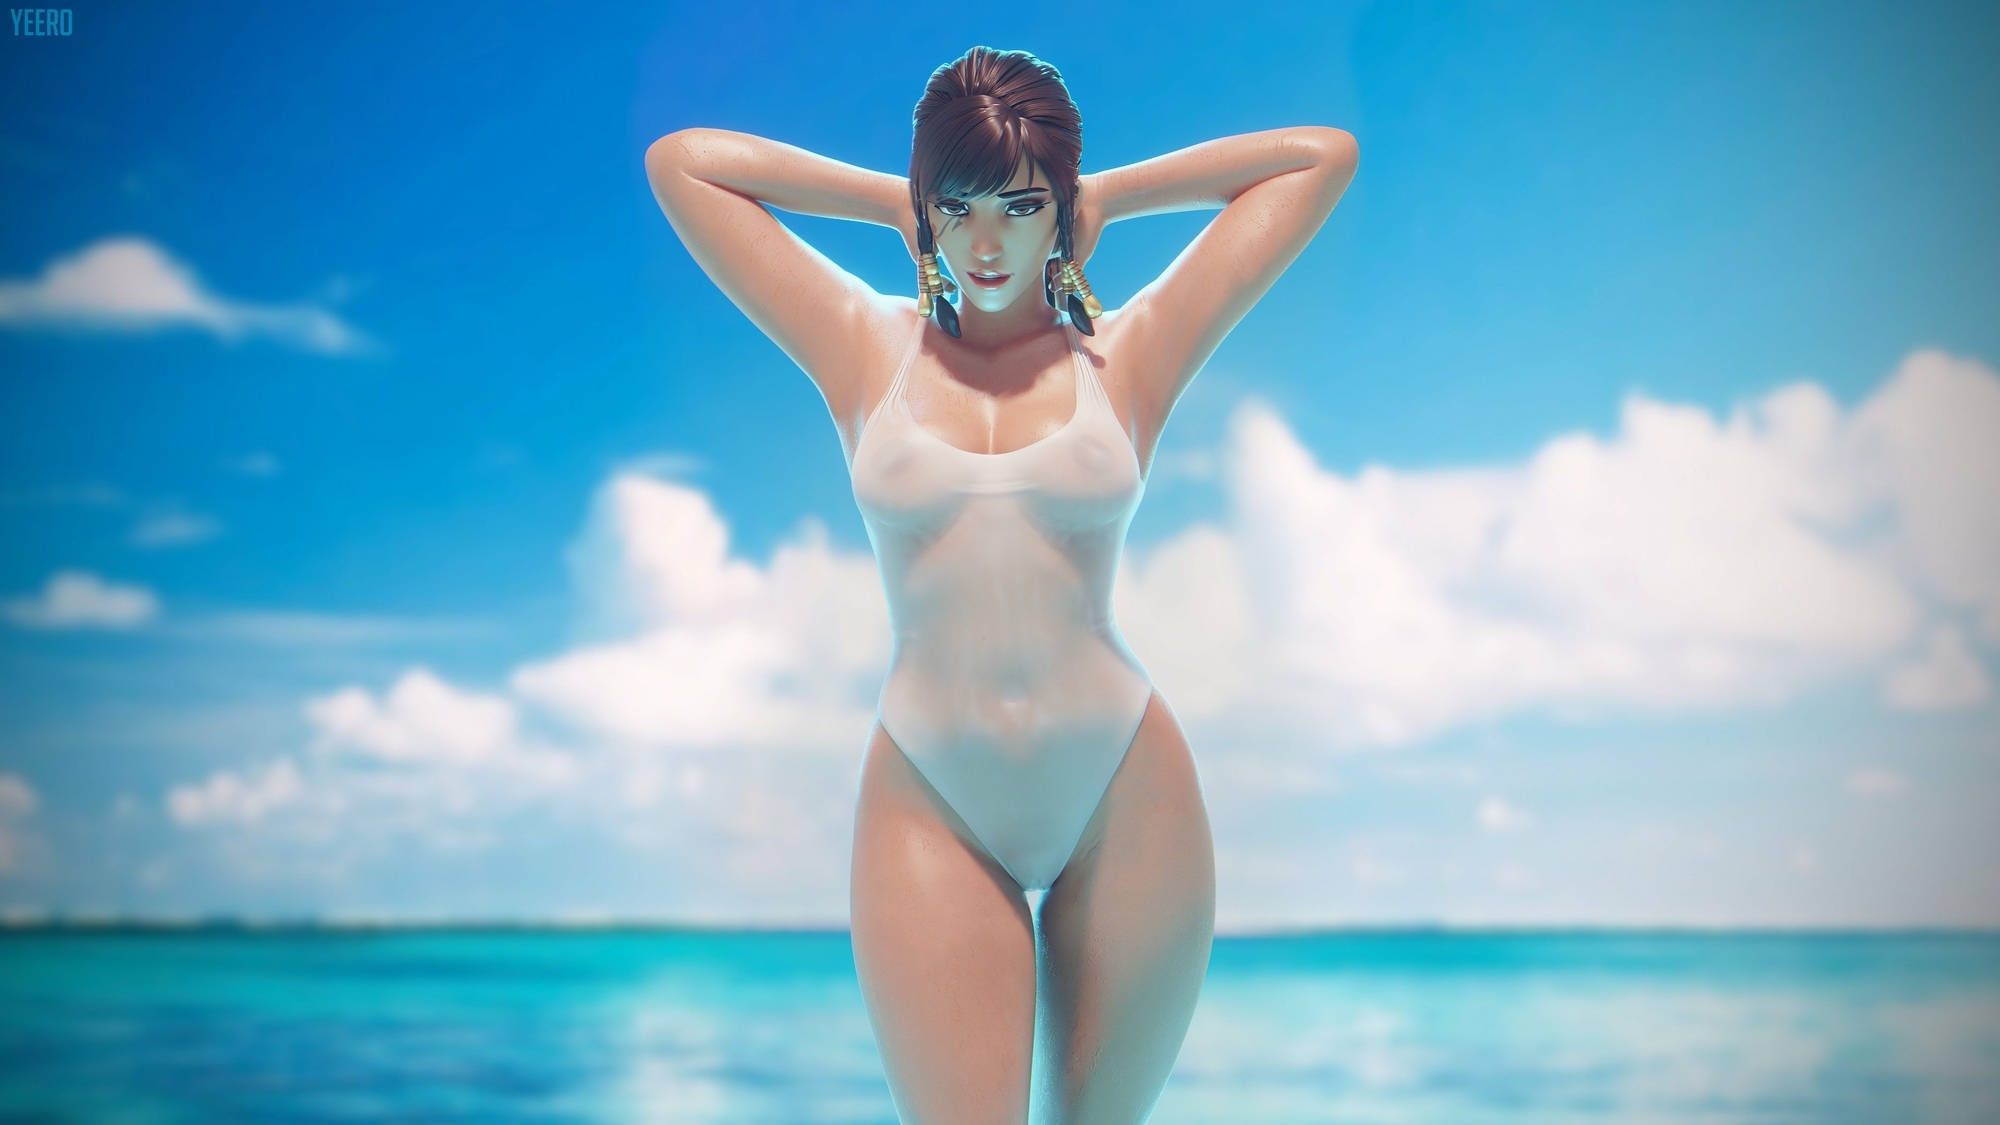 Pharah Swimsuit Overwatch Pharah Overwatch Sexy Swimsuit Wet Big Tits Big Breasts Big boobs Videogame Character Costume Hot Perfect Body 3d Porn 3d Girl Wet Pussy See Through